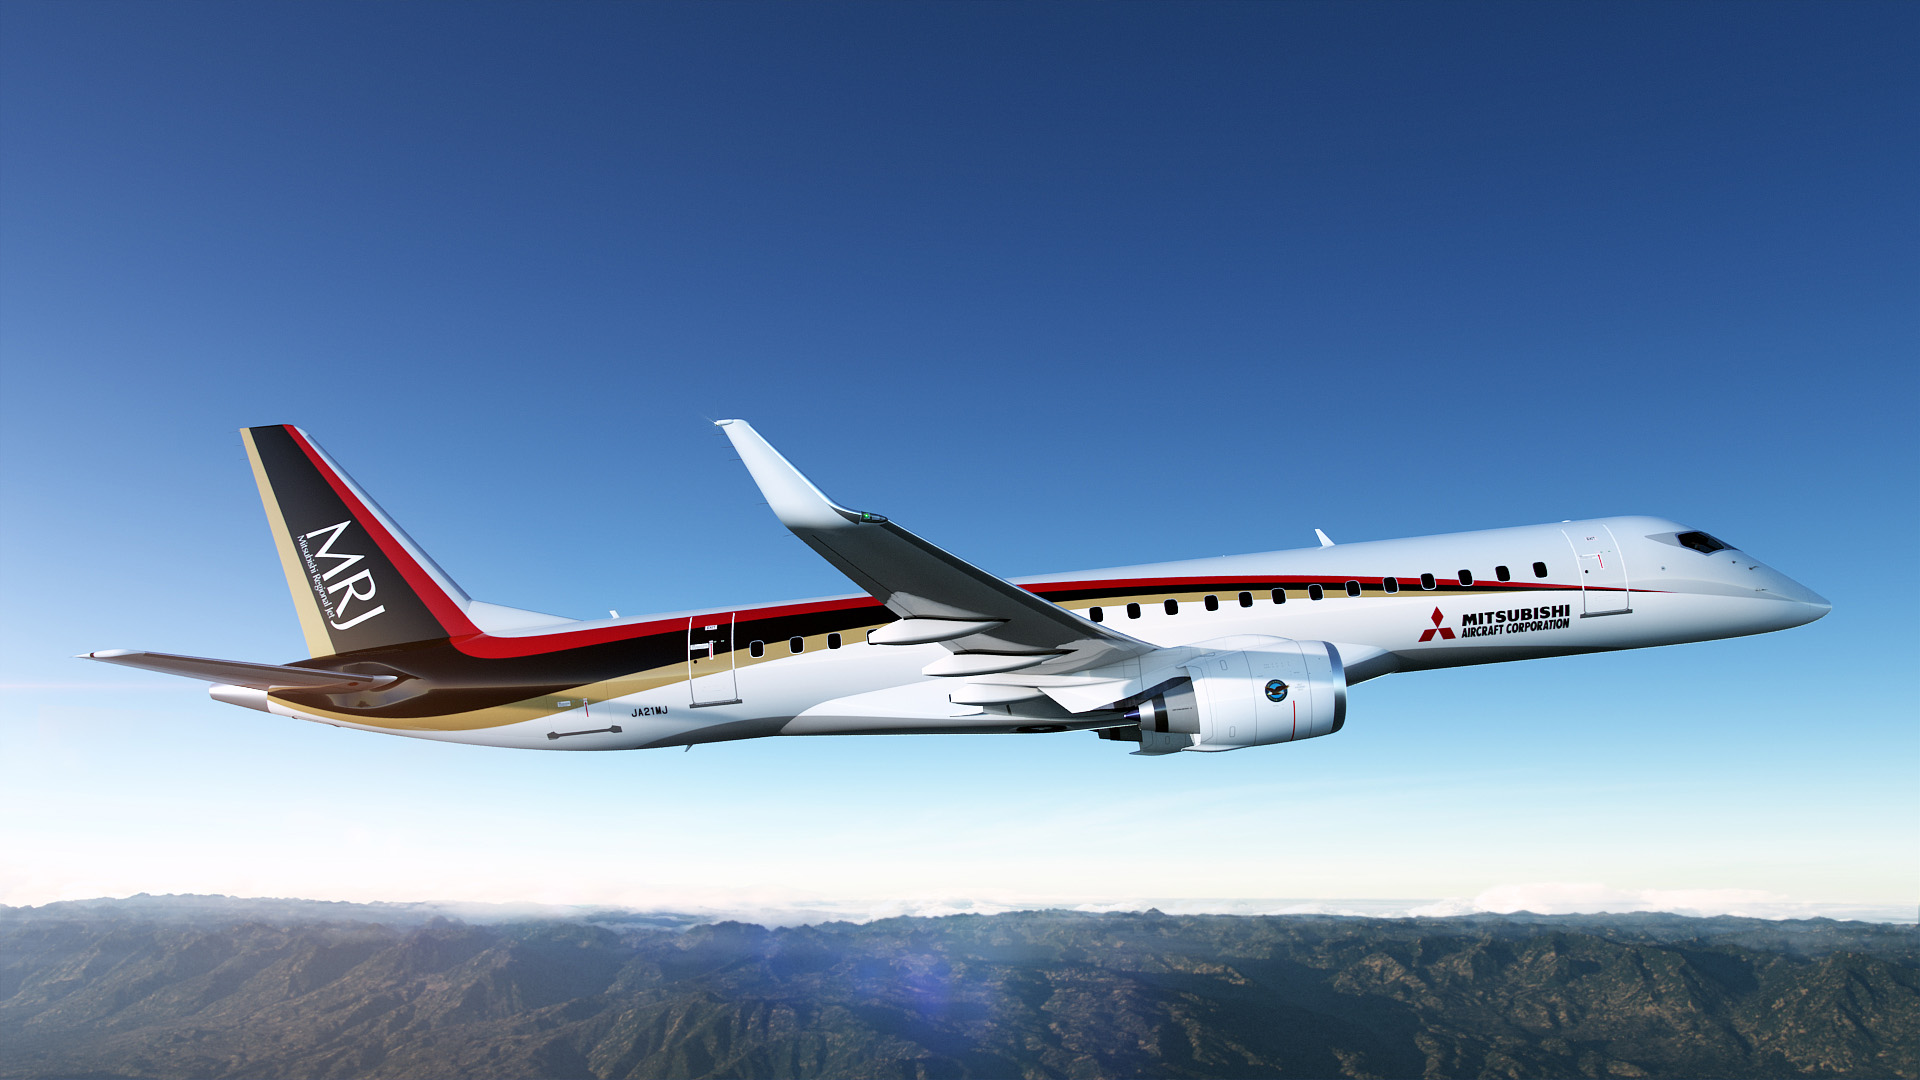 The MRJ design incorporates superior technology and passenger comfort. Engineered to achieve the lowest operational cost and lowest environmental impact. Better for passengers, the environment and airlines, the MRJ will change the way you fly.